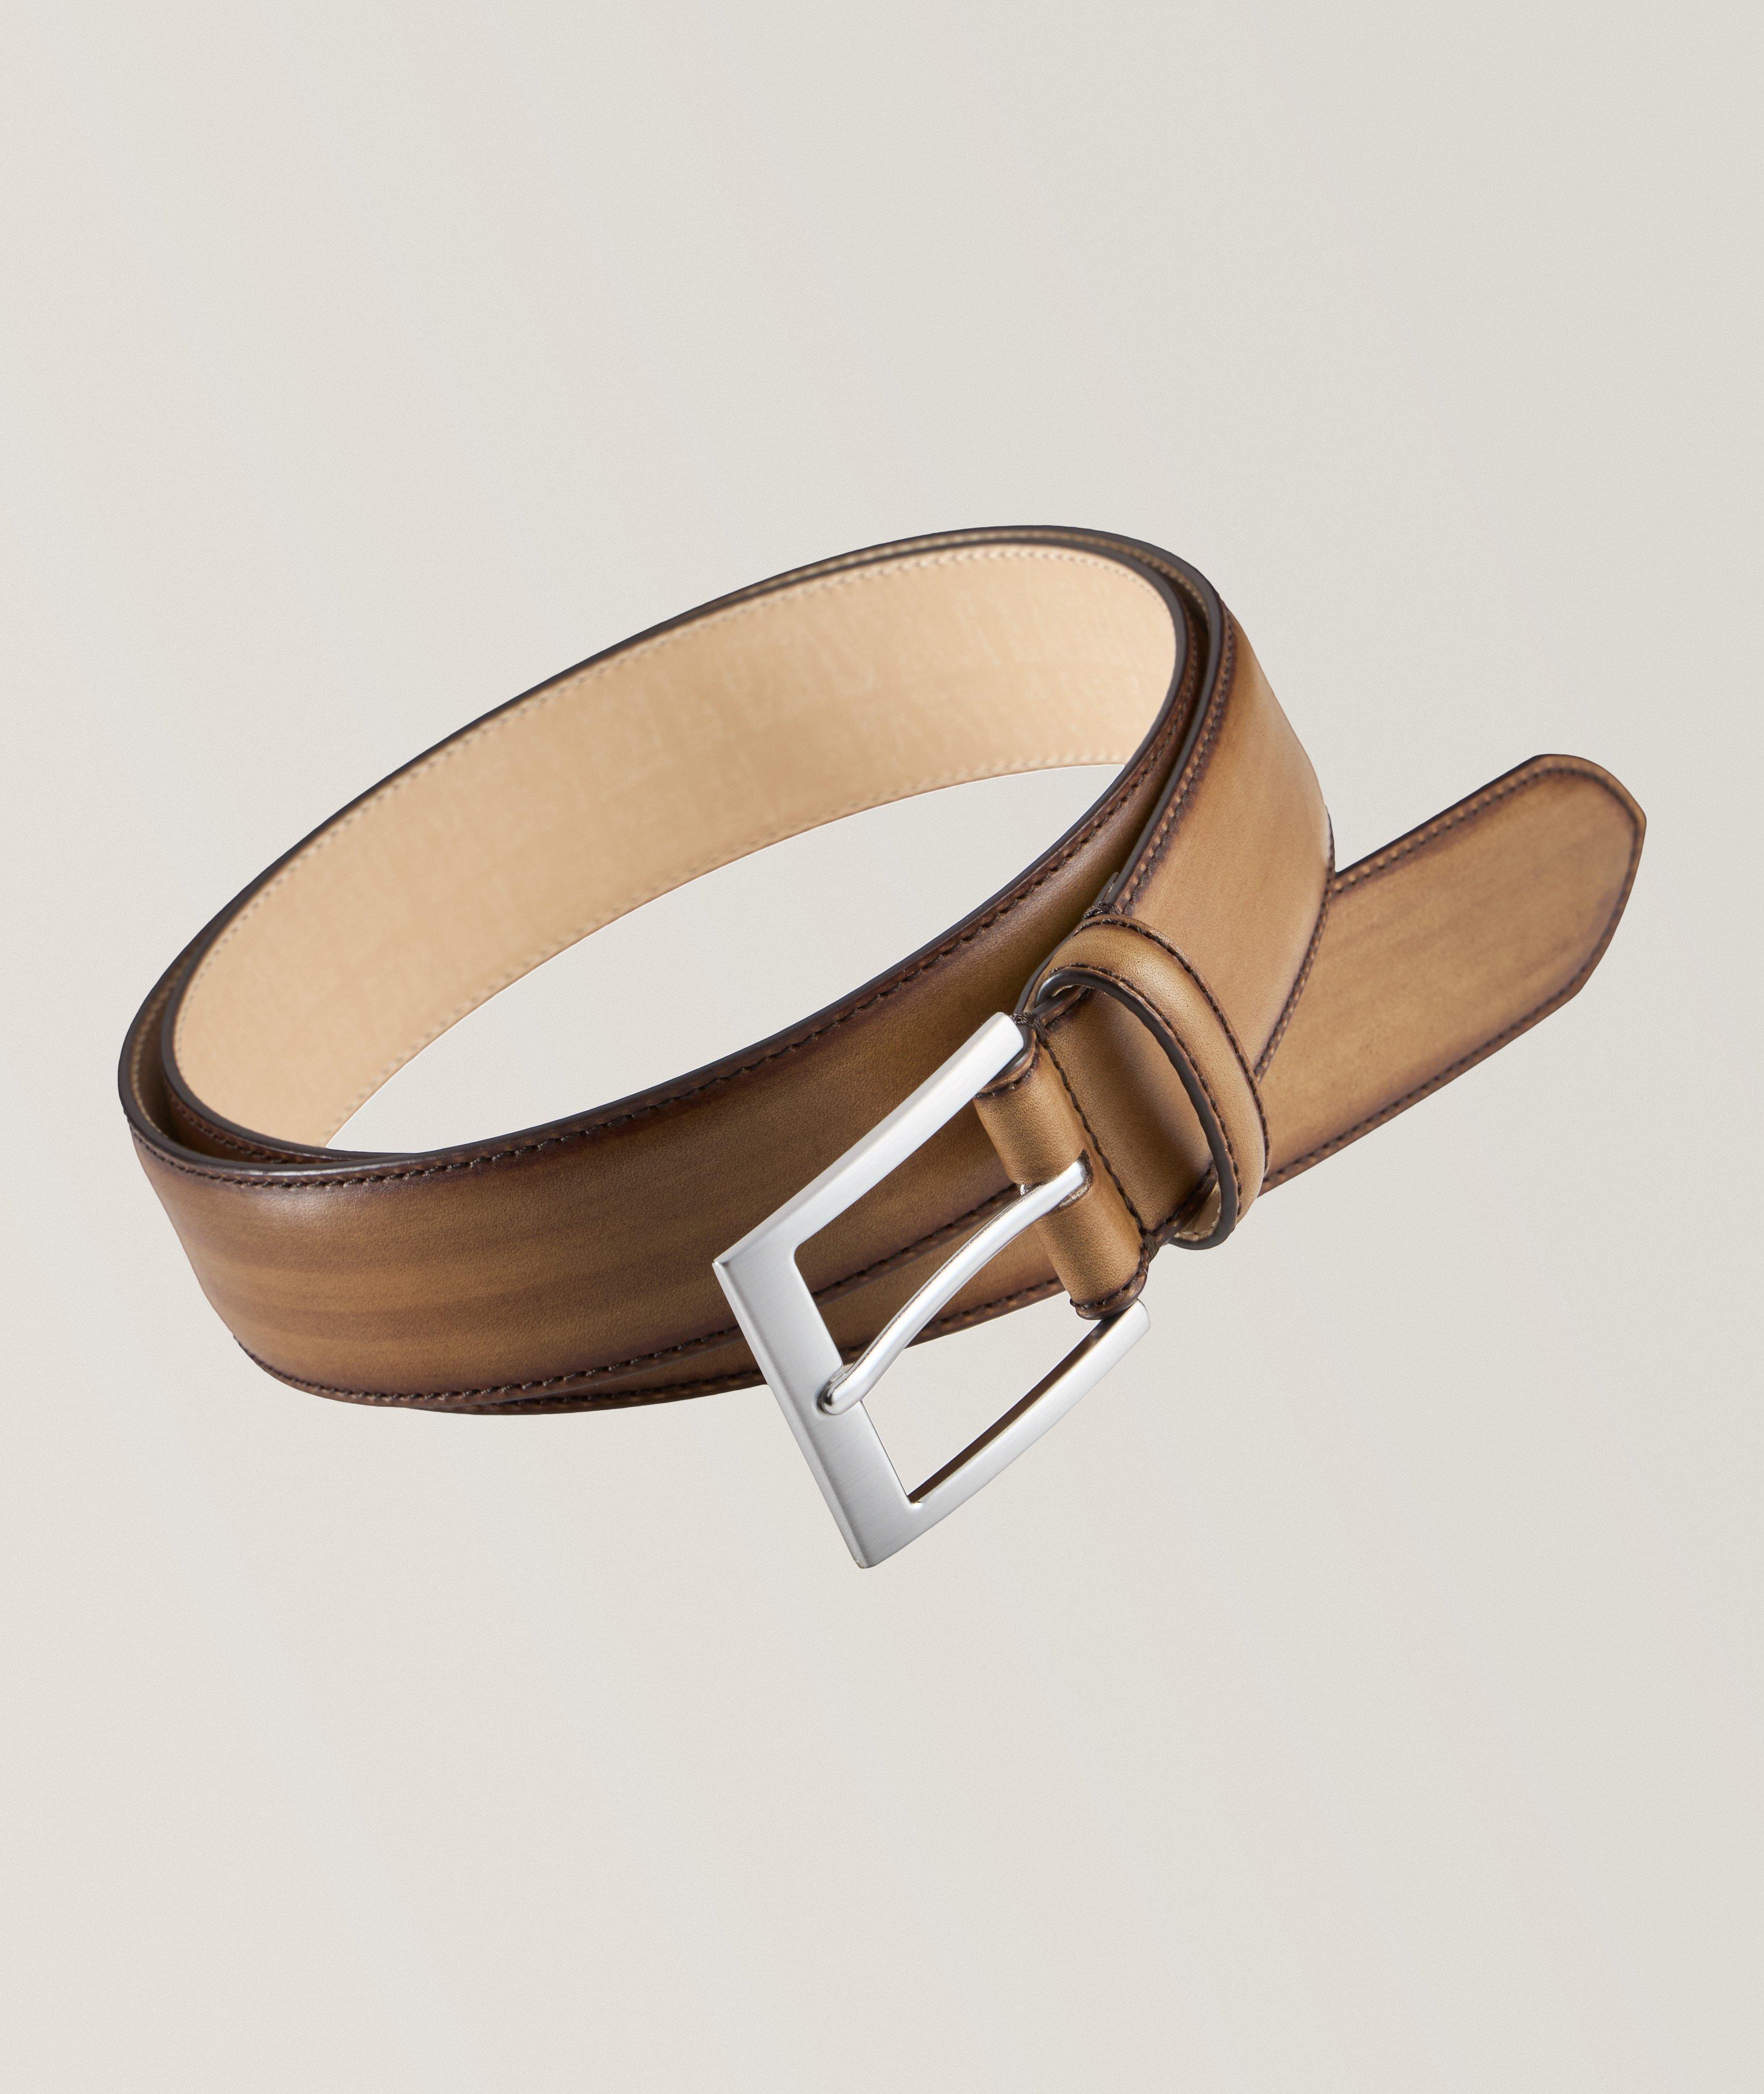 Leather Pin-Buckle Belt  image 0